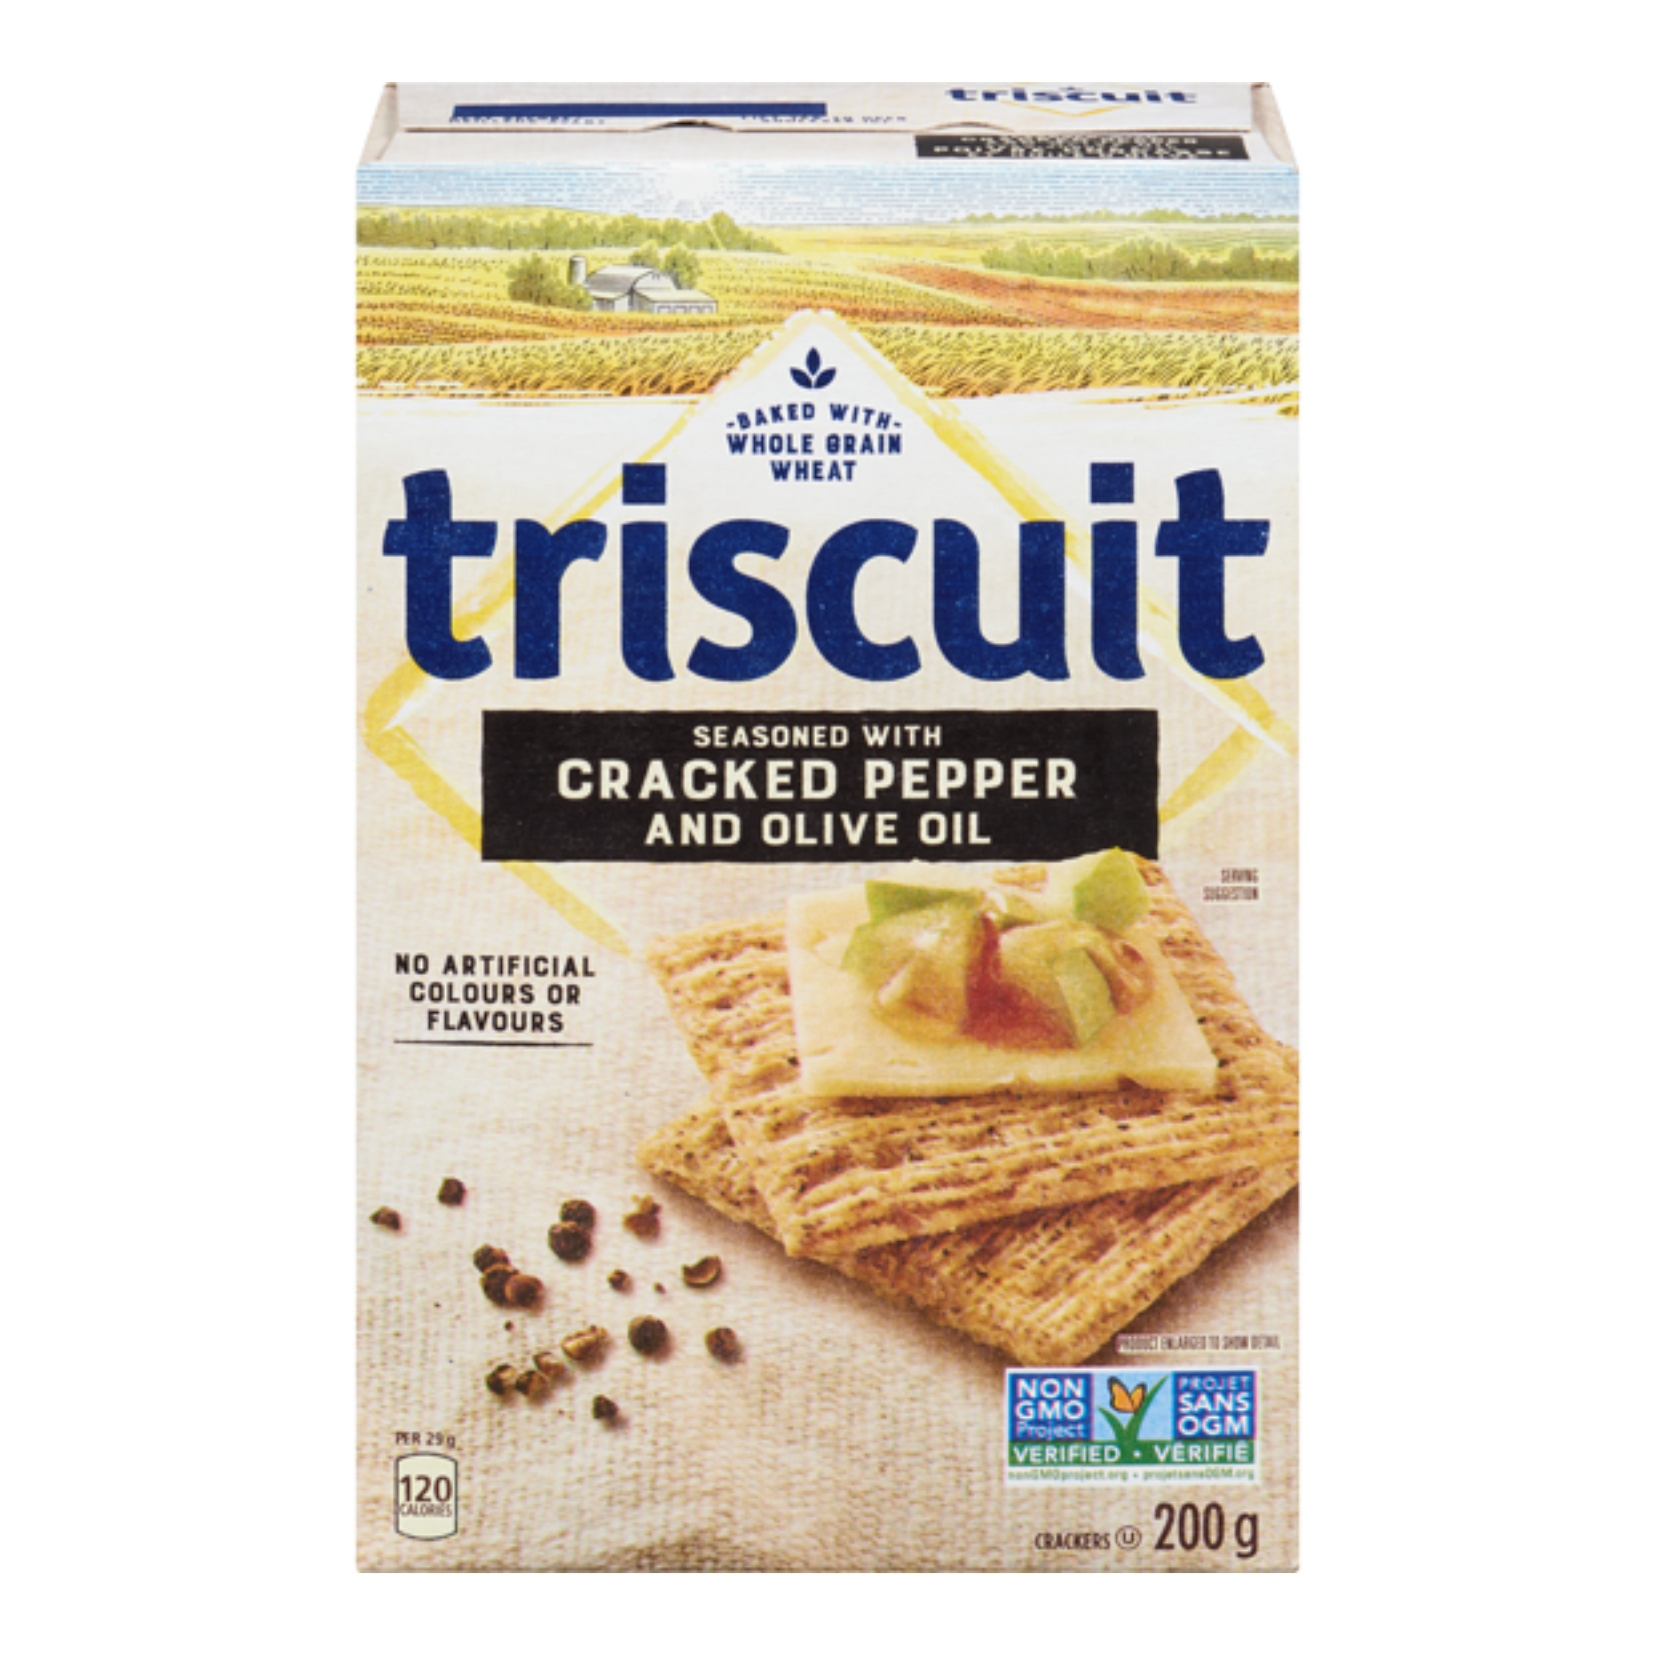 Christie Triscuit Cracked Pepper & Olive Oil Crackers 200g